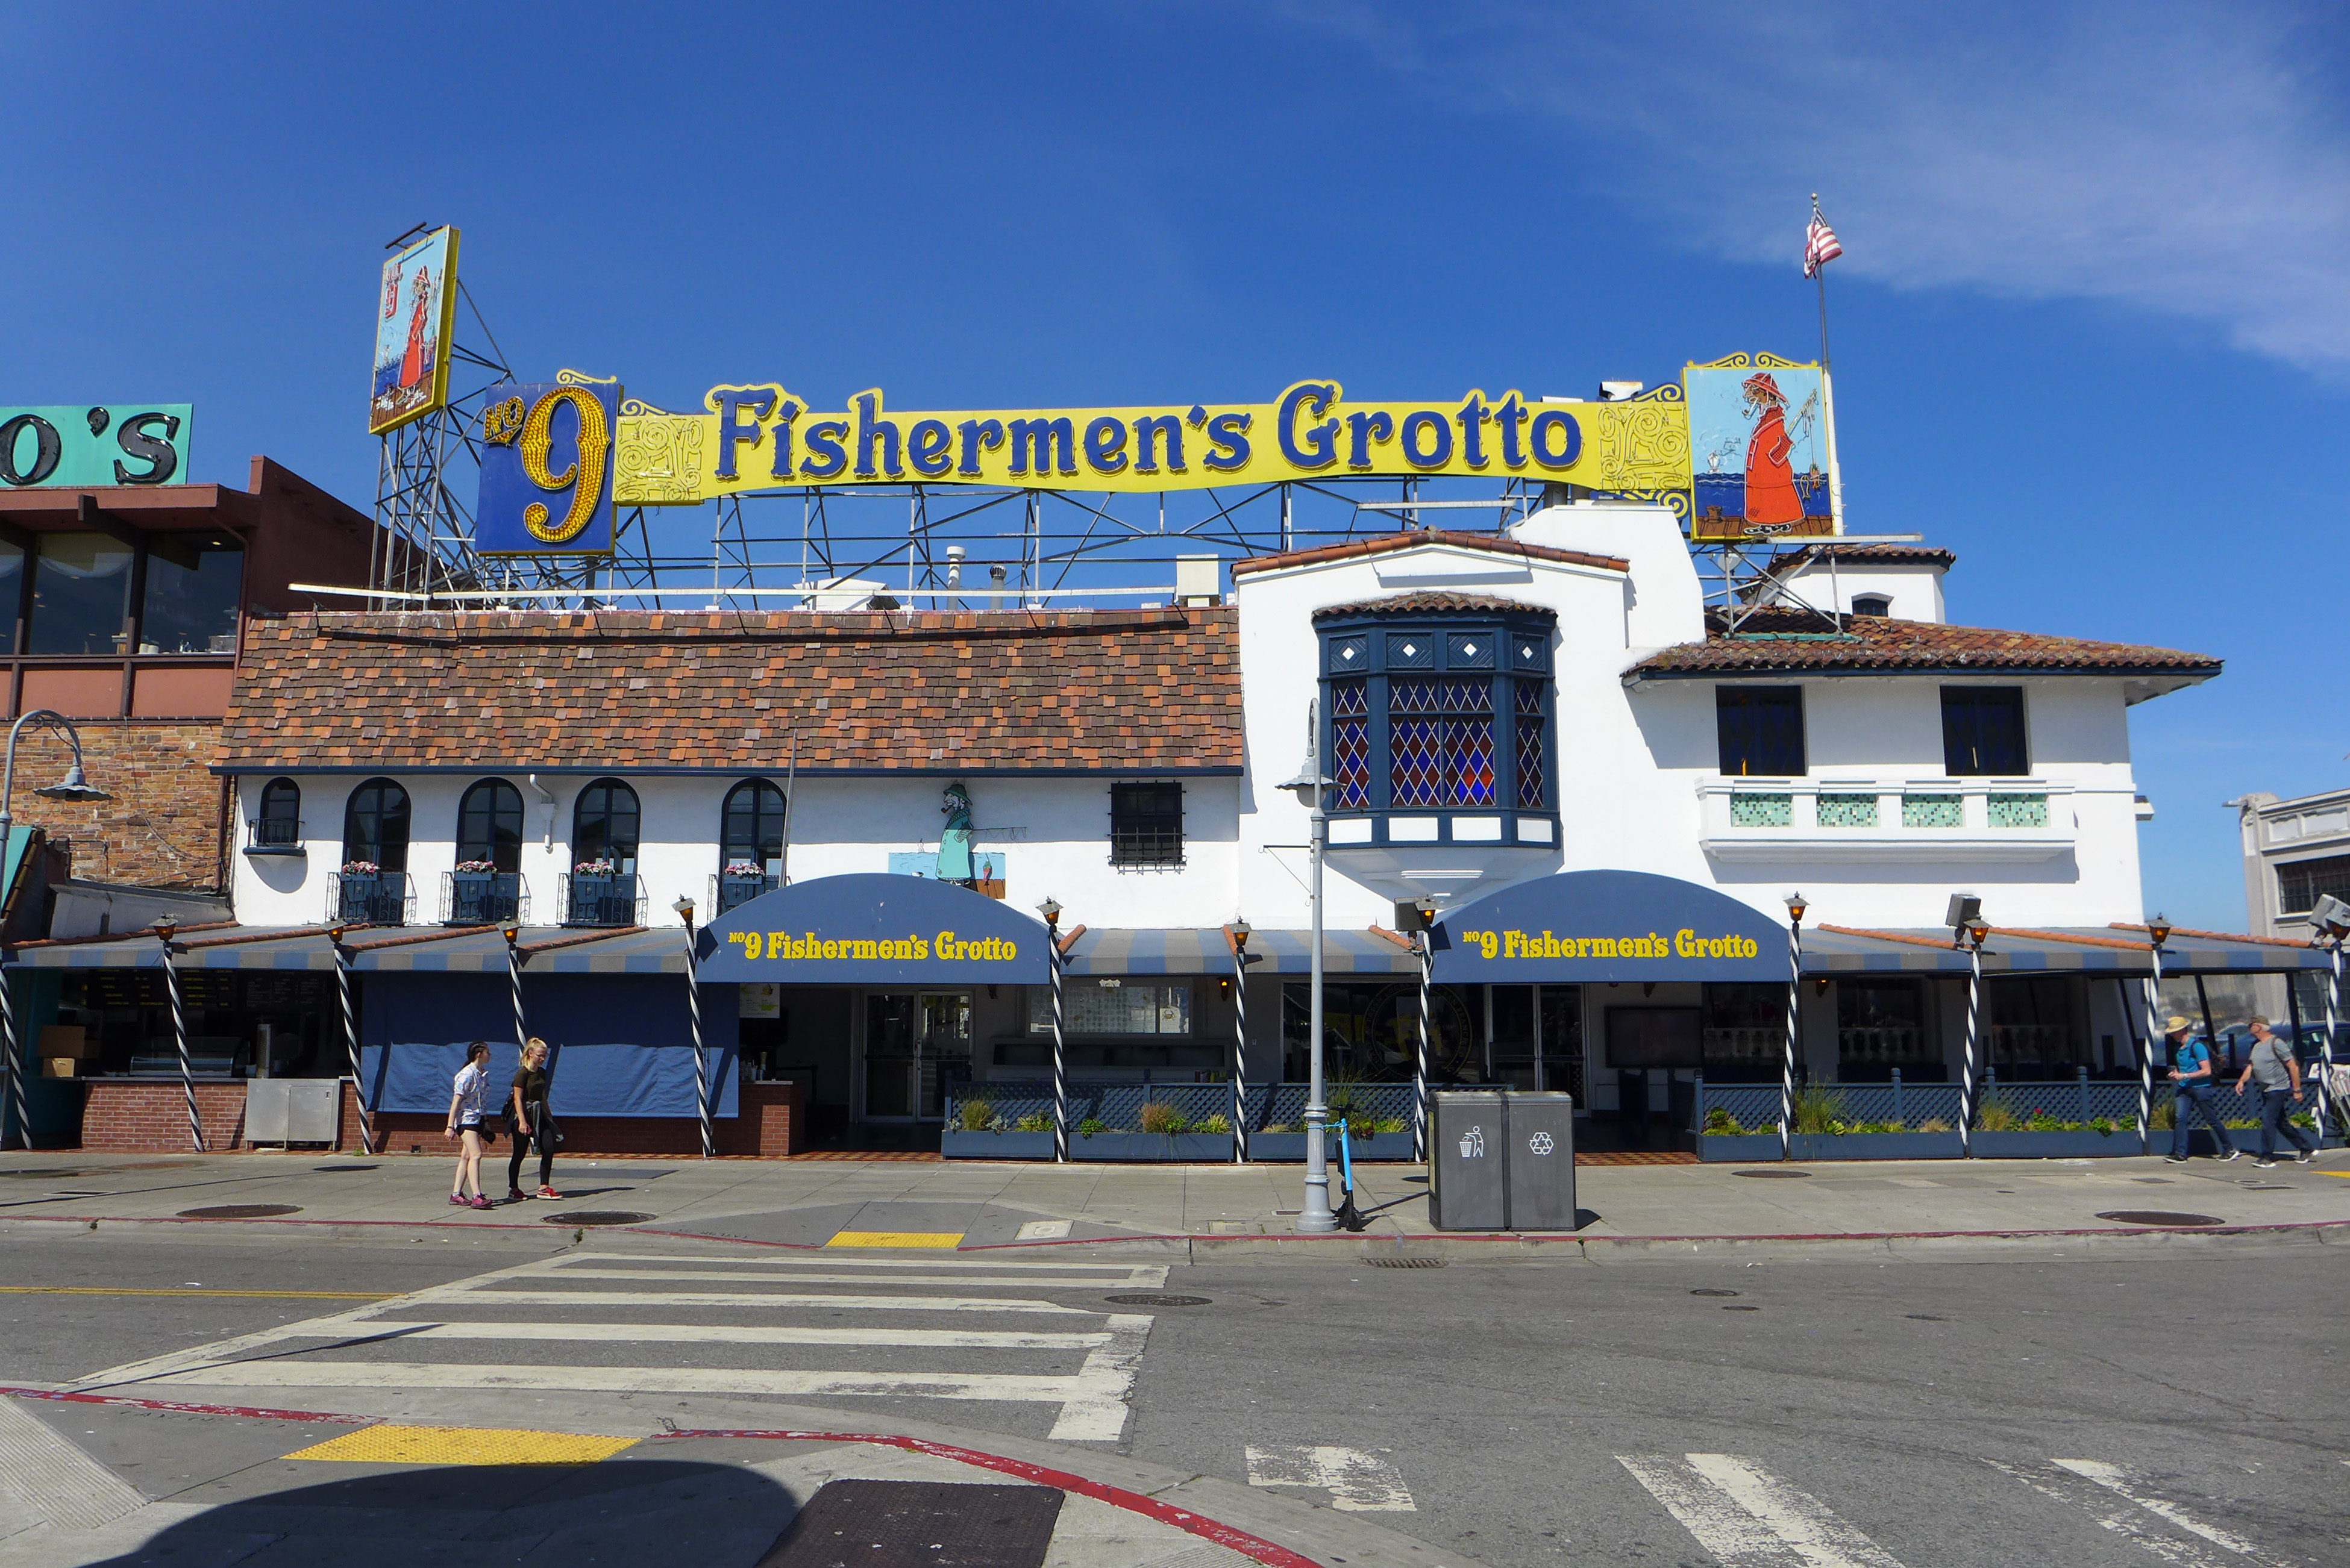 The exterior of Fisherman’s Grotto.